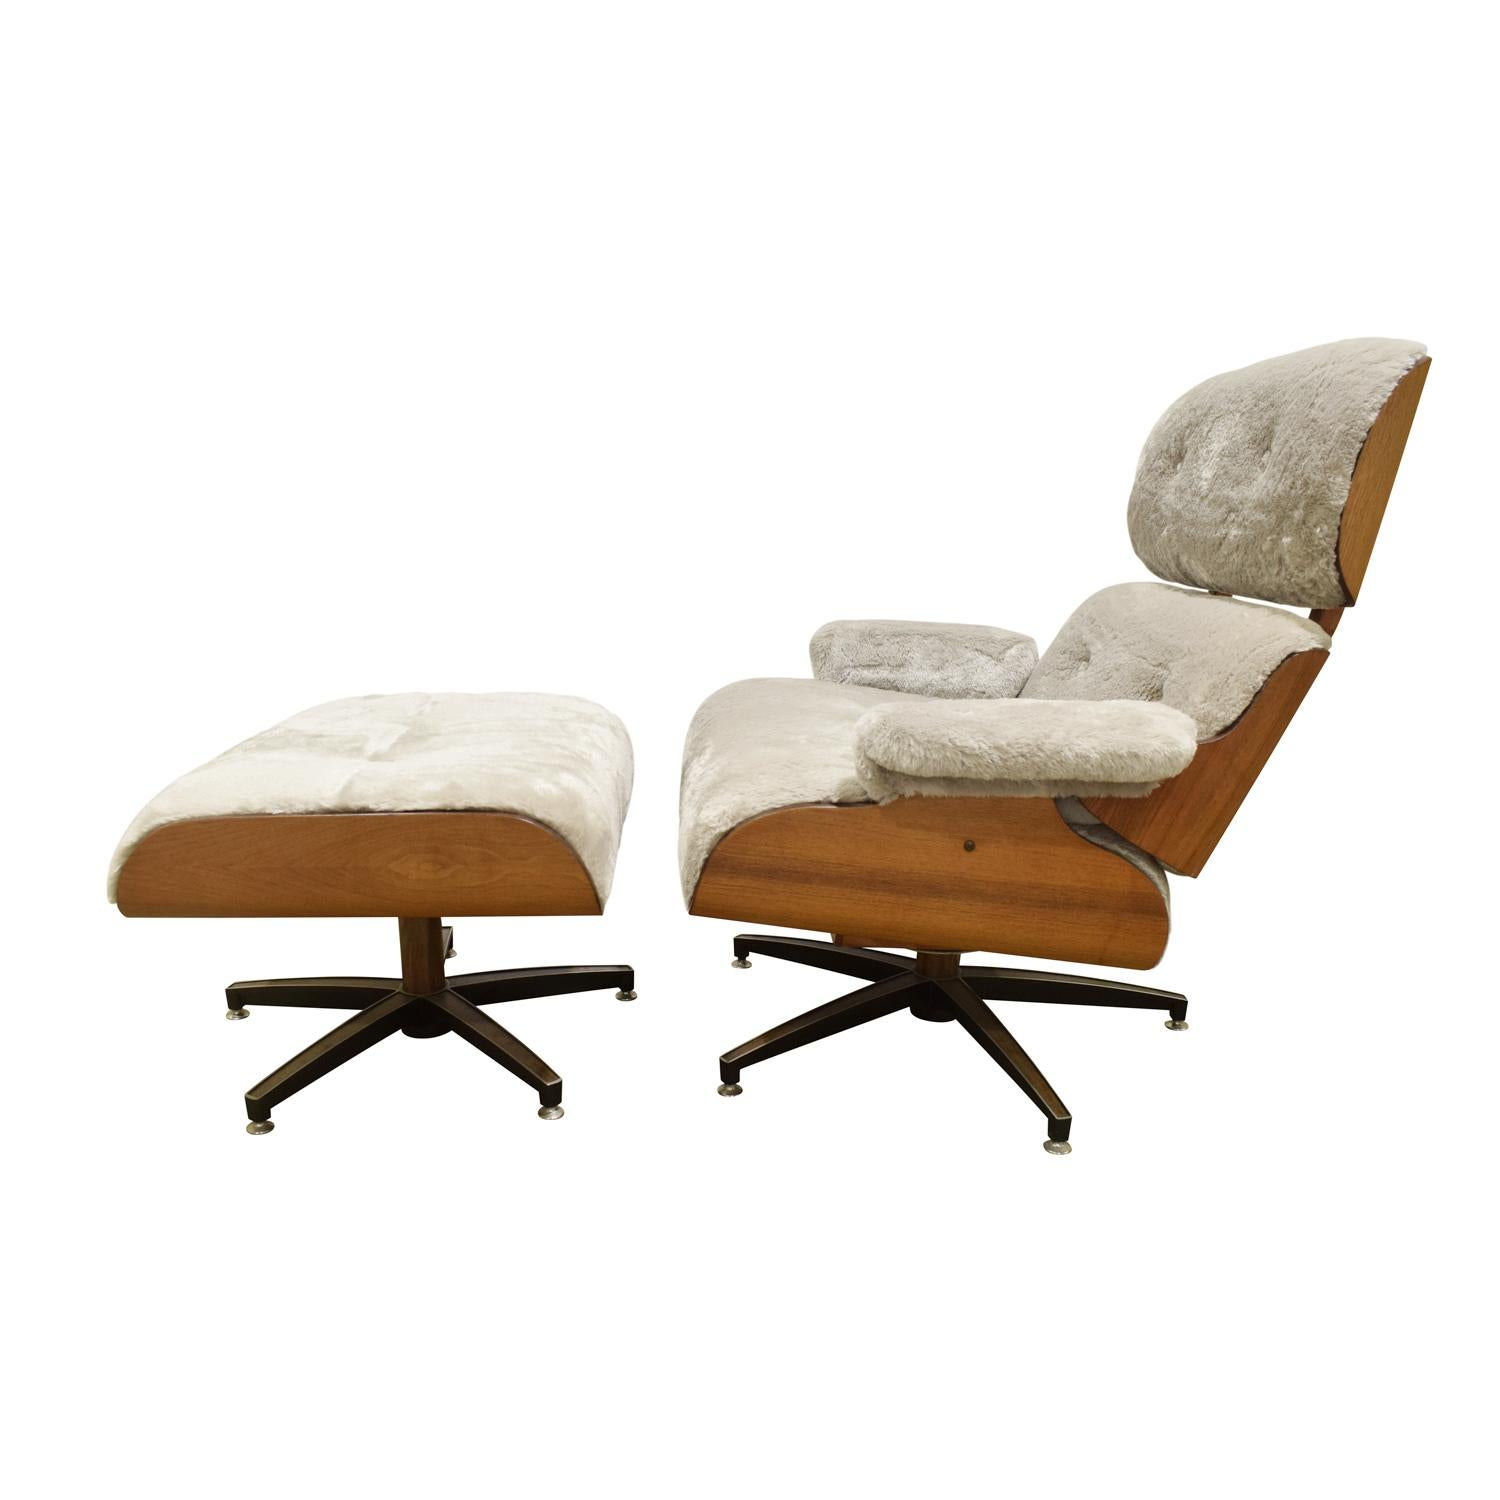 Eames style chair and ottoman in teak and steel with seat and back newly upholstered in faux fur, Denmark, 1970s. A very cool Scandinavian interpretation of an American Classic.

Ottoman dimensions:
W 26 inches
D 21.5 inches
H 16.5 inches.